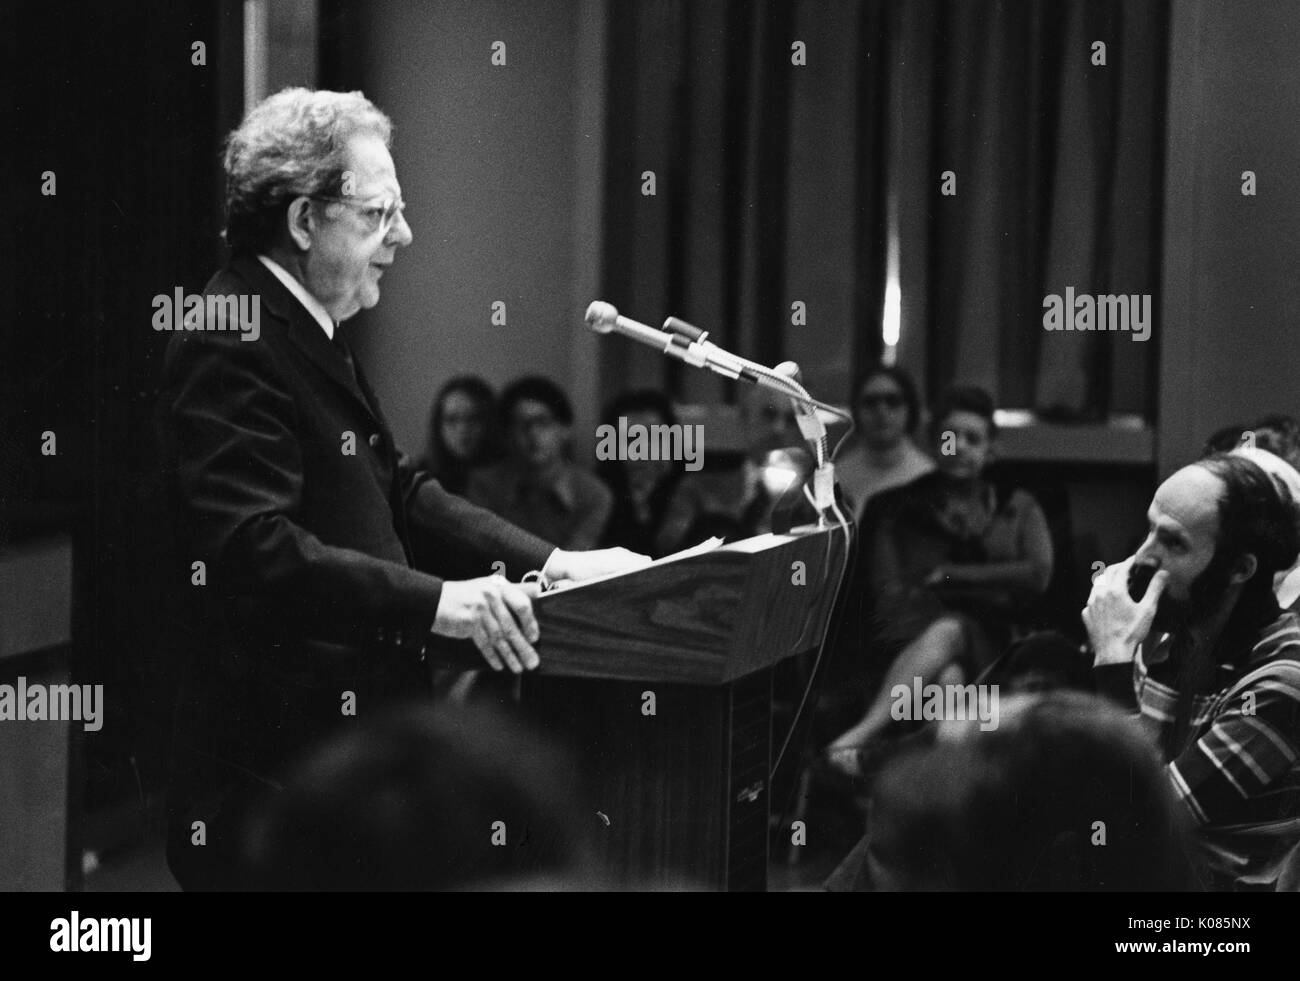 Three-quarter length portrait of author Northrup Frye, standing behind a wooden podium and making a speech to an audience, wearing a dark suit and glasses, with a serious facial expression, hands both firmly pressed on the podium, 1972. Stock Photo